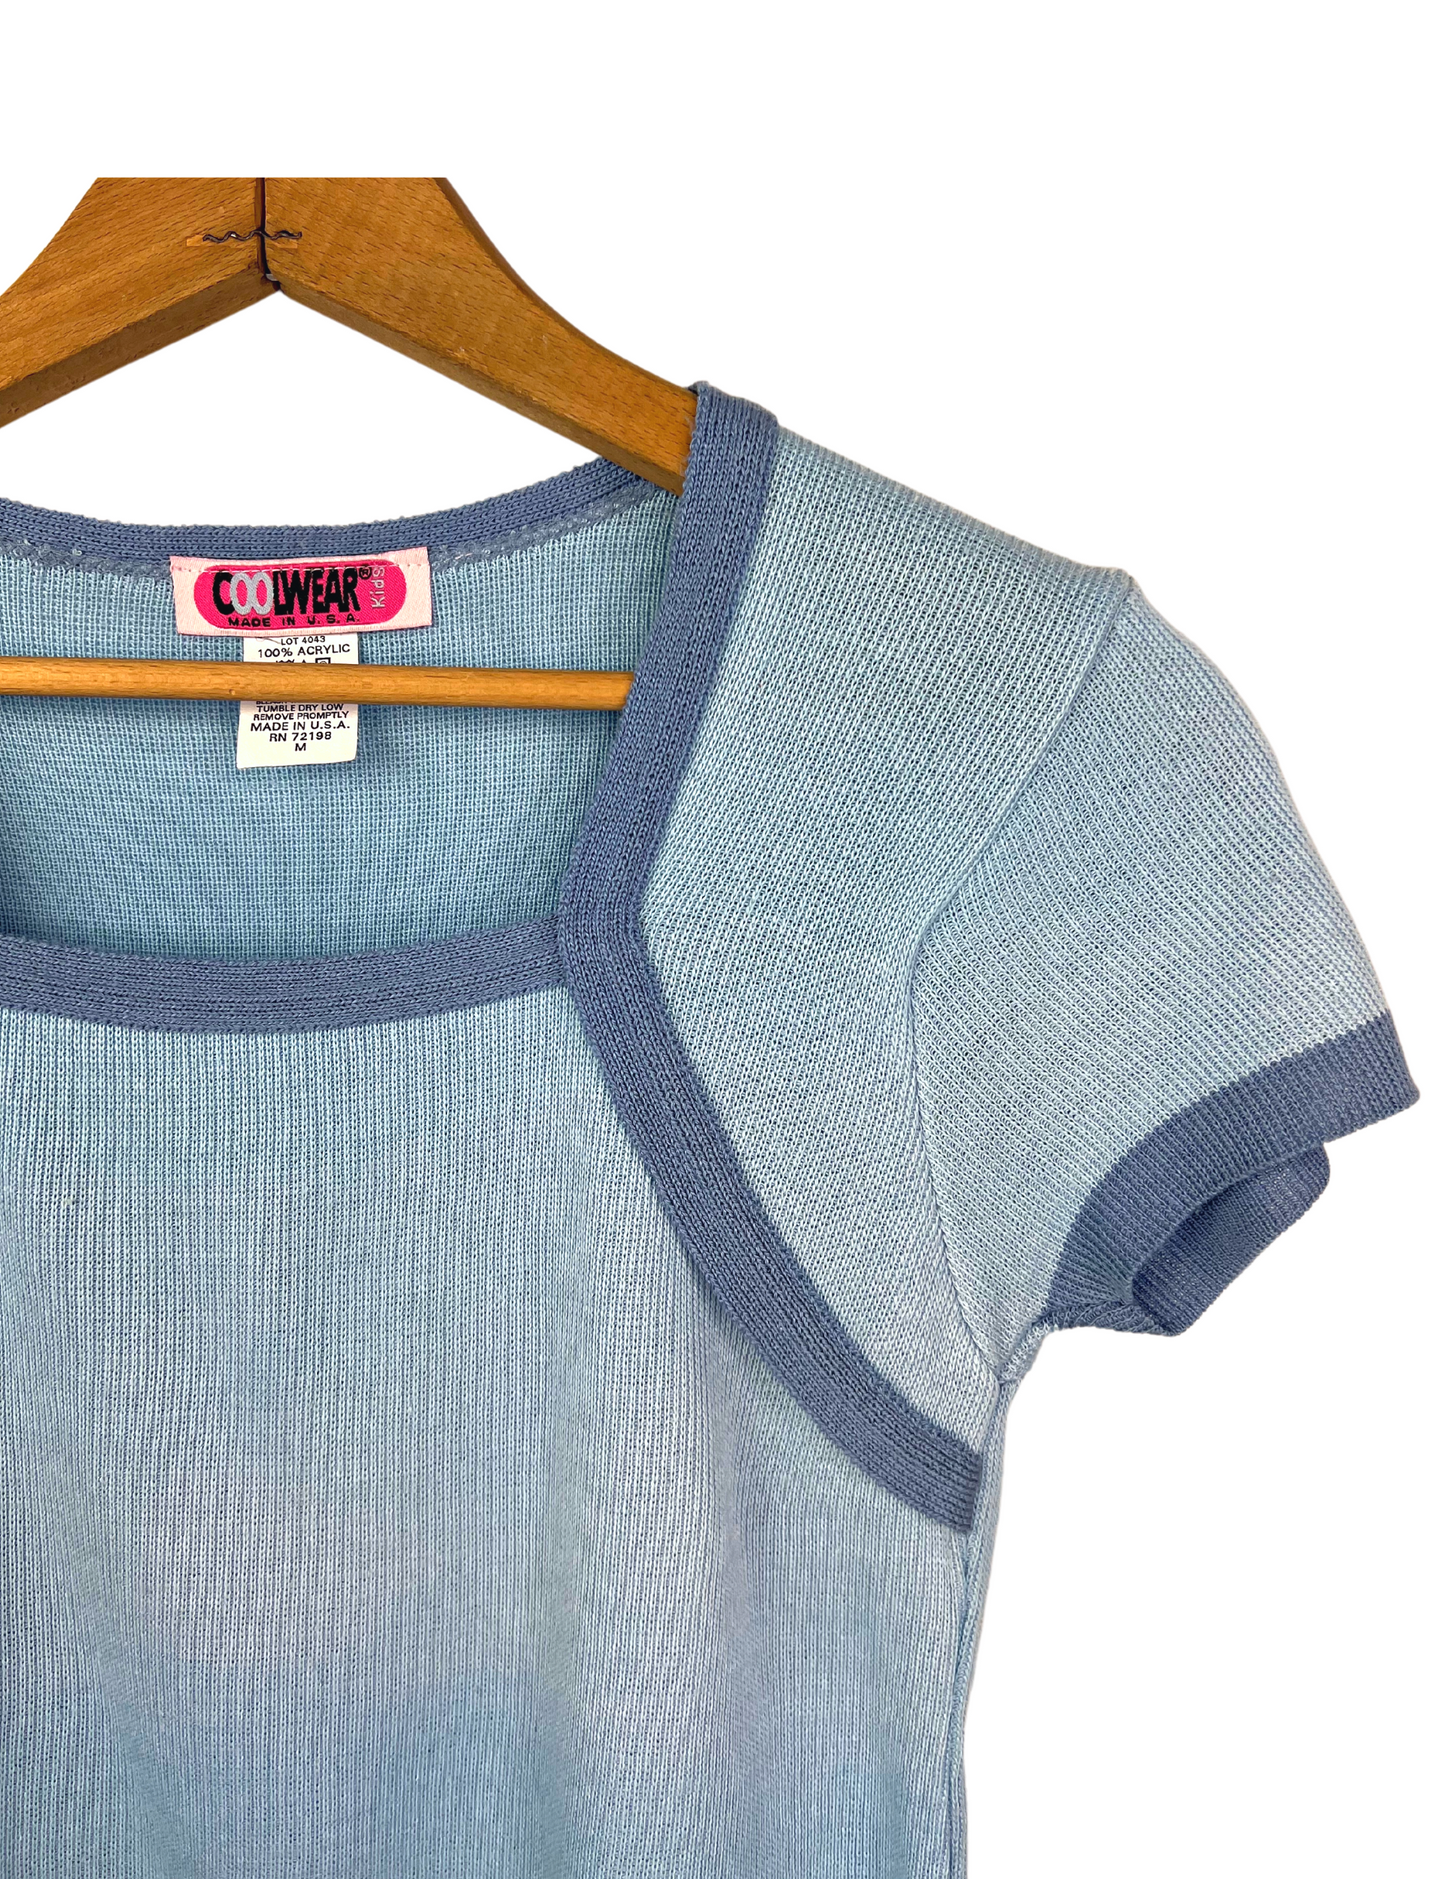 90’s Blue Ombré Attached Shrug Fitted Knit Crop Babydoll Tee